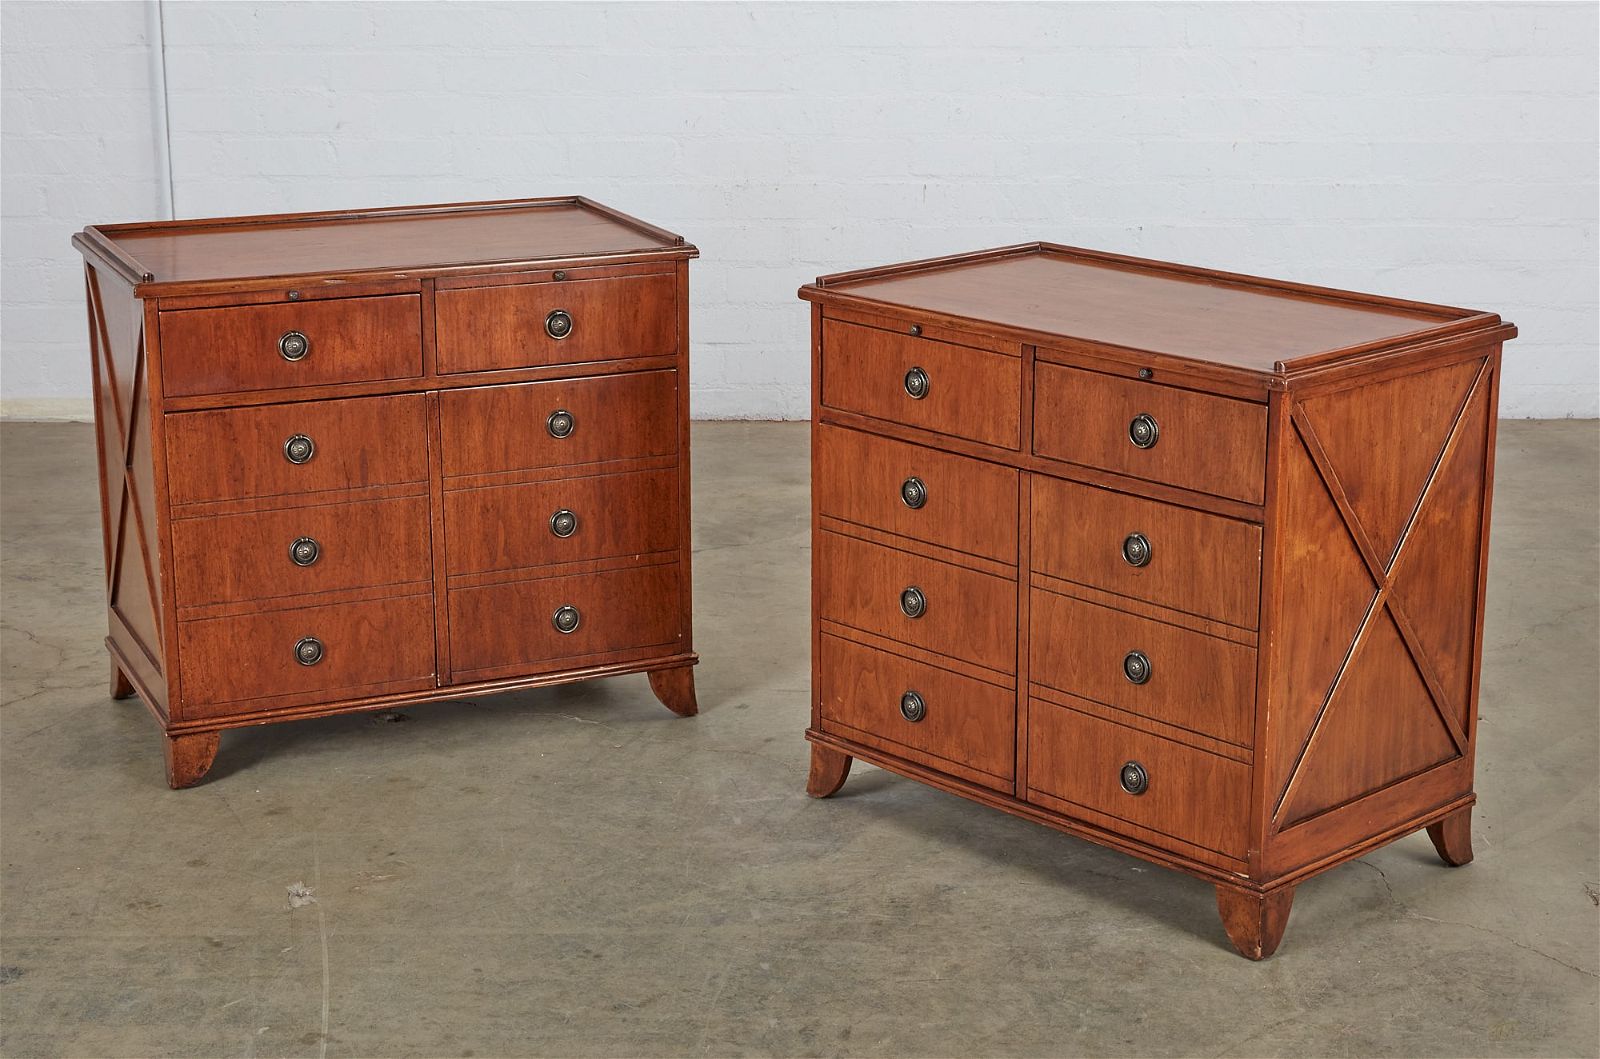 A PAIR OF HARDWOOD CABINETS, MODERNA